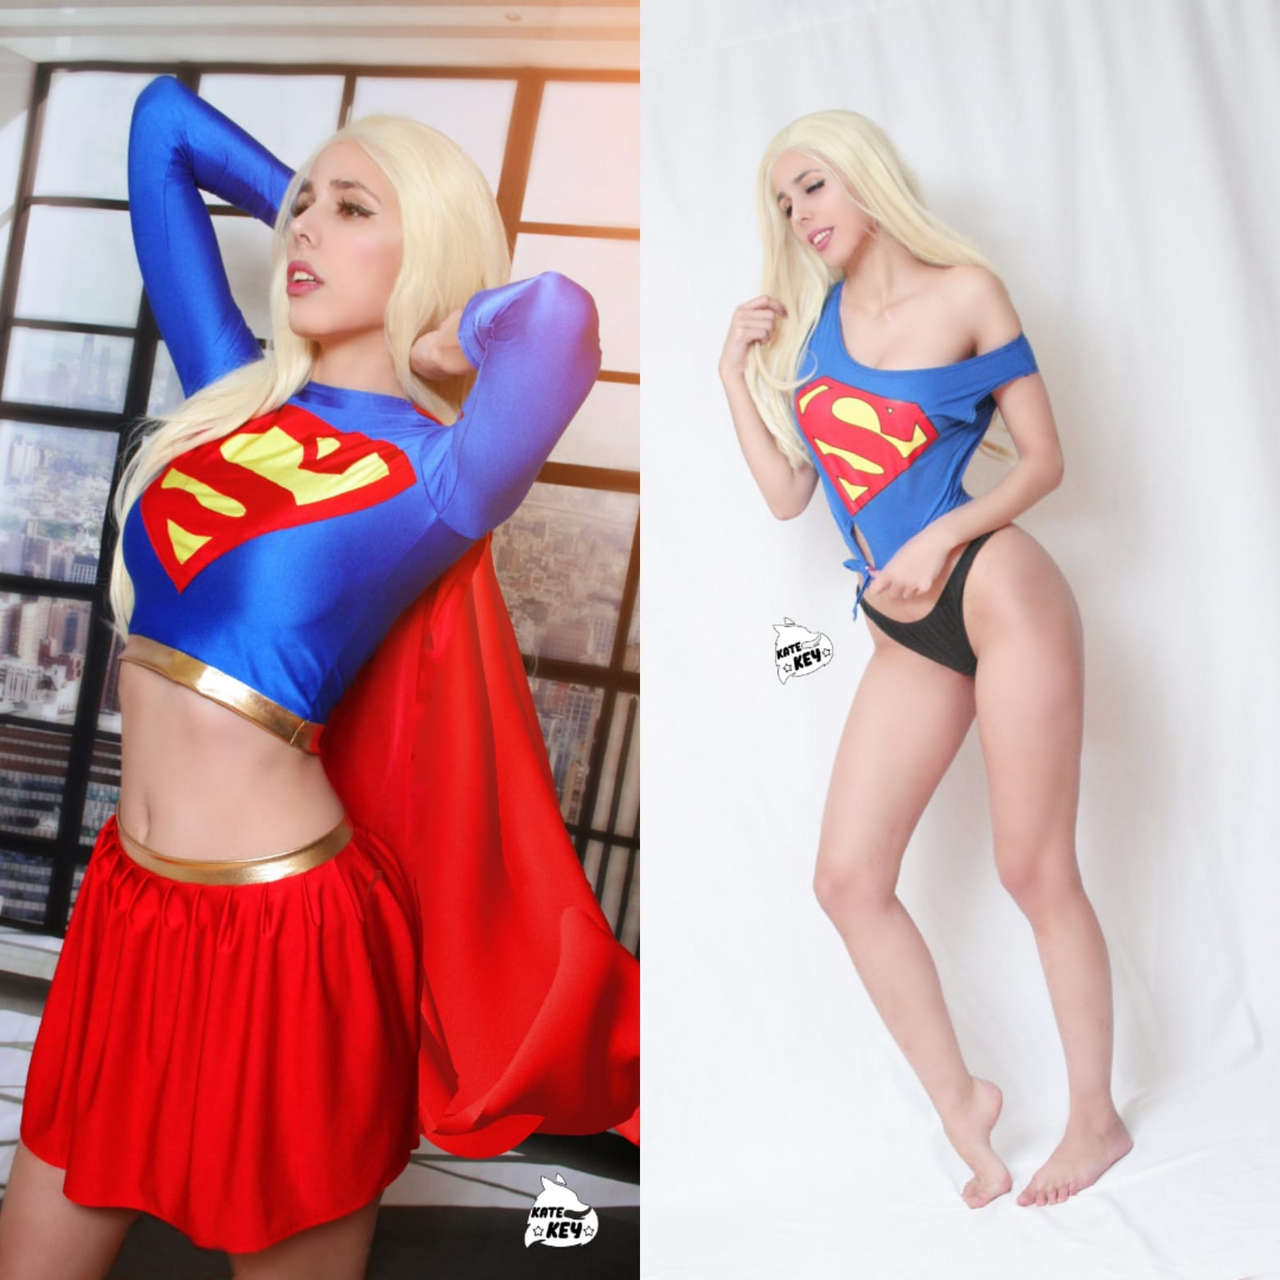 Im Your Supergirl On Off By Kate Key Sel